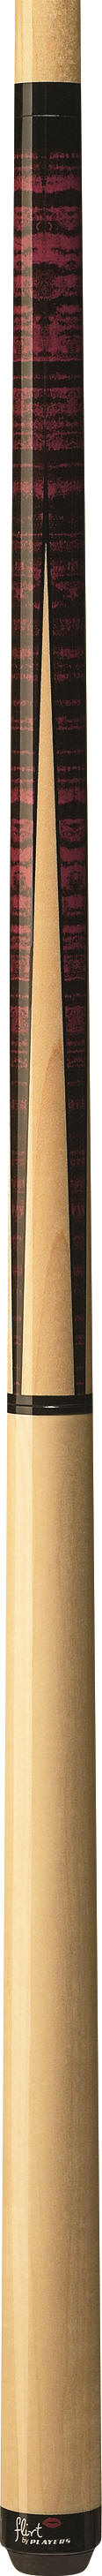 Players F-2500 Pool Cue